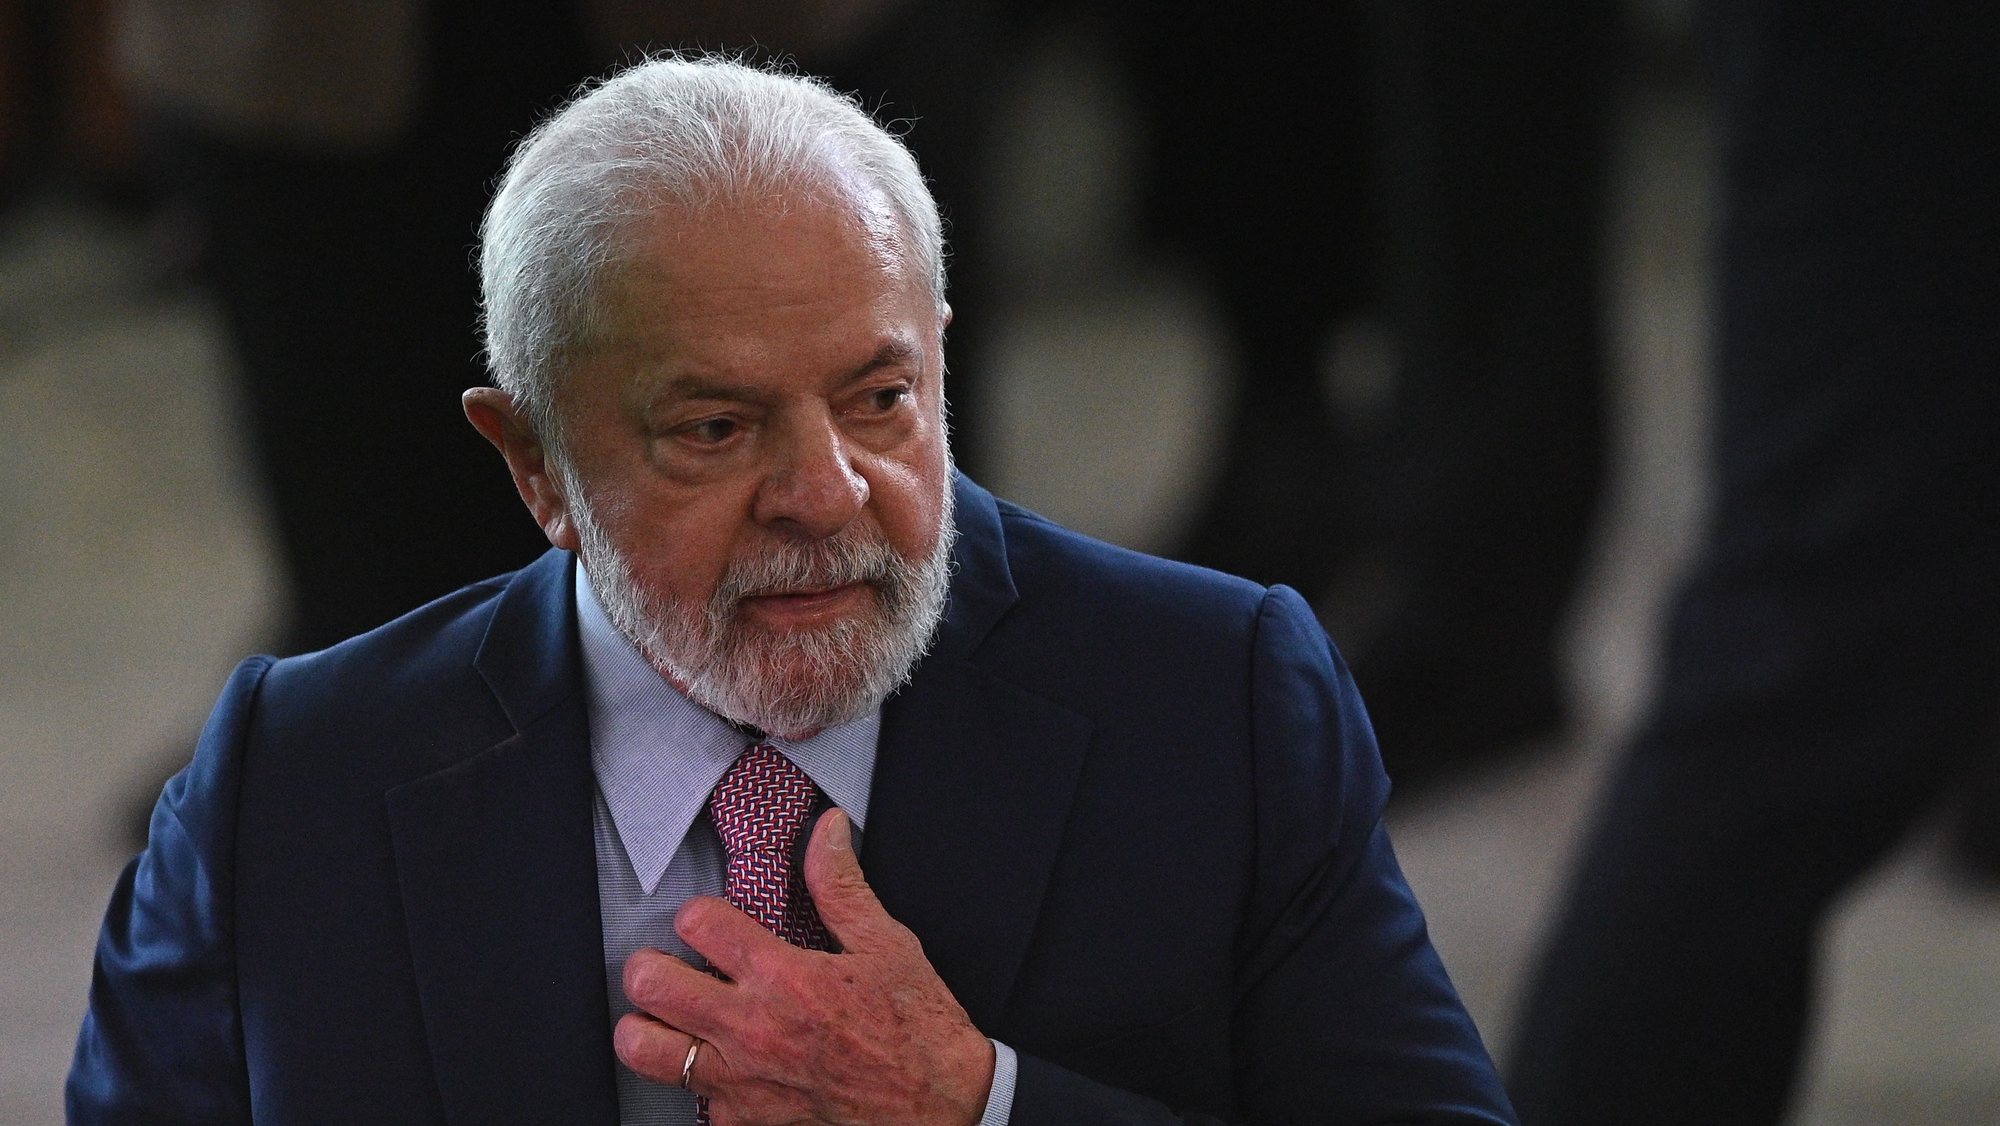 epa10783280 The President of Brazil, Luiz Inacio Lula da Silva, participates during the inauguration ceremony of the new Minister of Tourism, Celso Sabino, at the Planalto Palace, in Brasilia, Brazil, 3 August 2023. Deputy Celso Sabino assumed the position of Tourism Minister of Brazil, in a crowded act that served to reinforce the support of the center-right sectors for the government of the progressive Luiz InÃ¡cio Lula da Silva.  EPA/Andre Borges